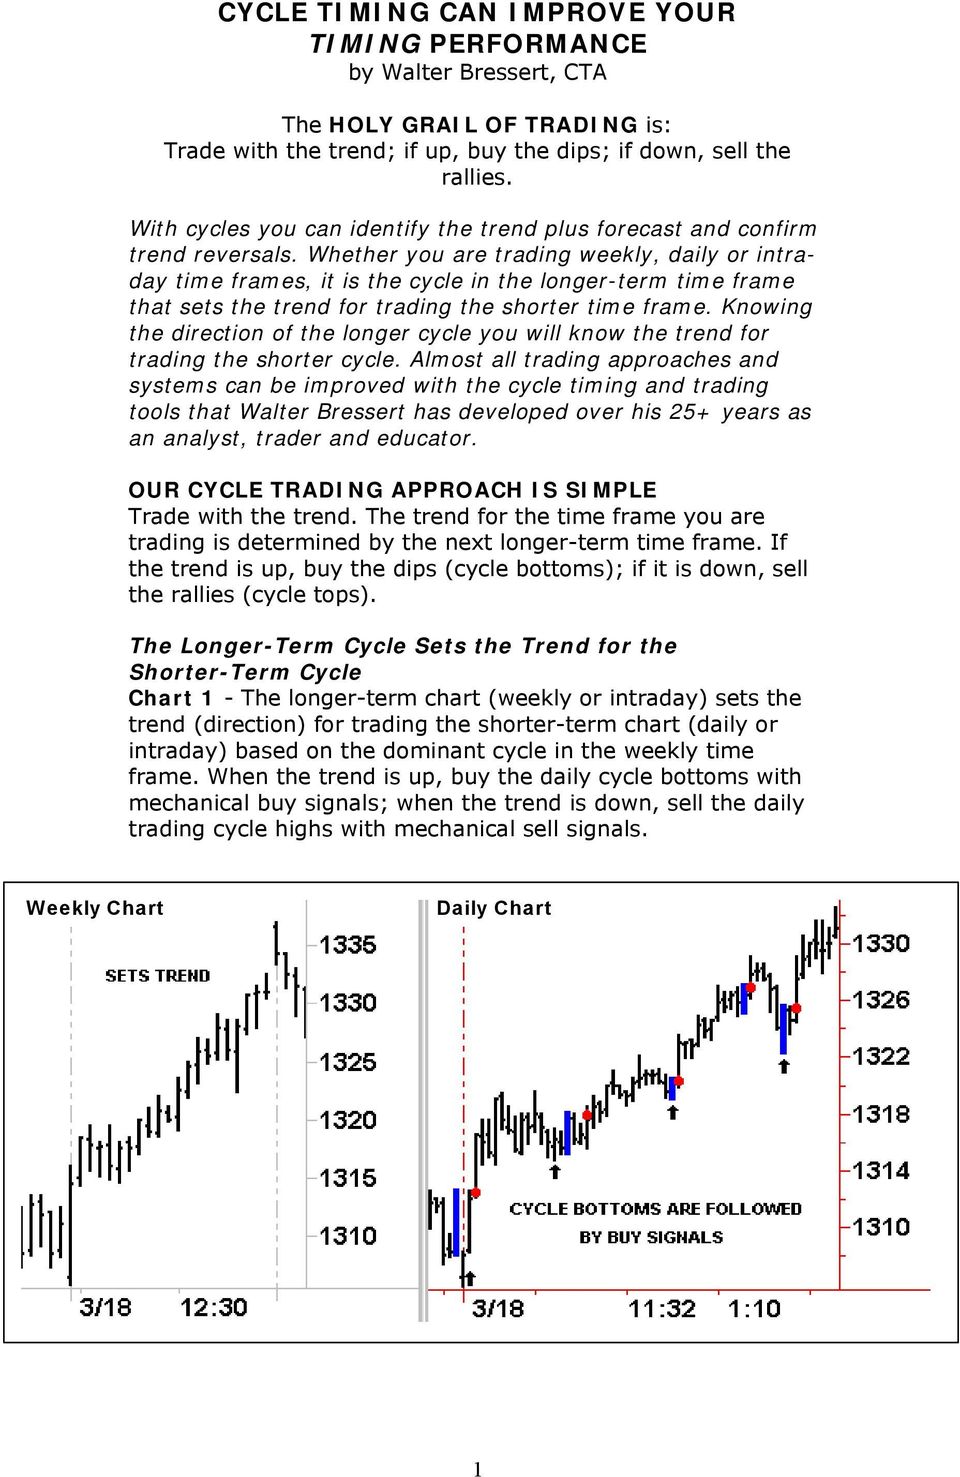 Whether you are trading weekly, daily or intraday time frames, it is the cycle in the longer-term time frame that sets the trend for trading the shorter time frame.